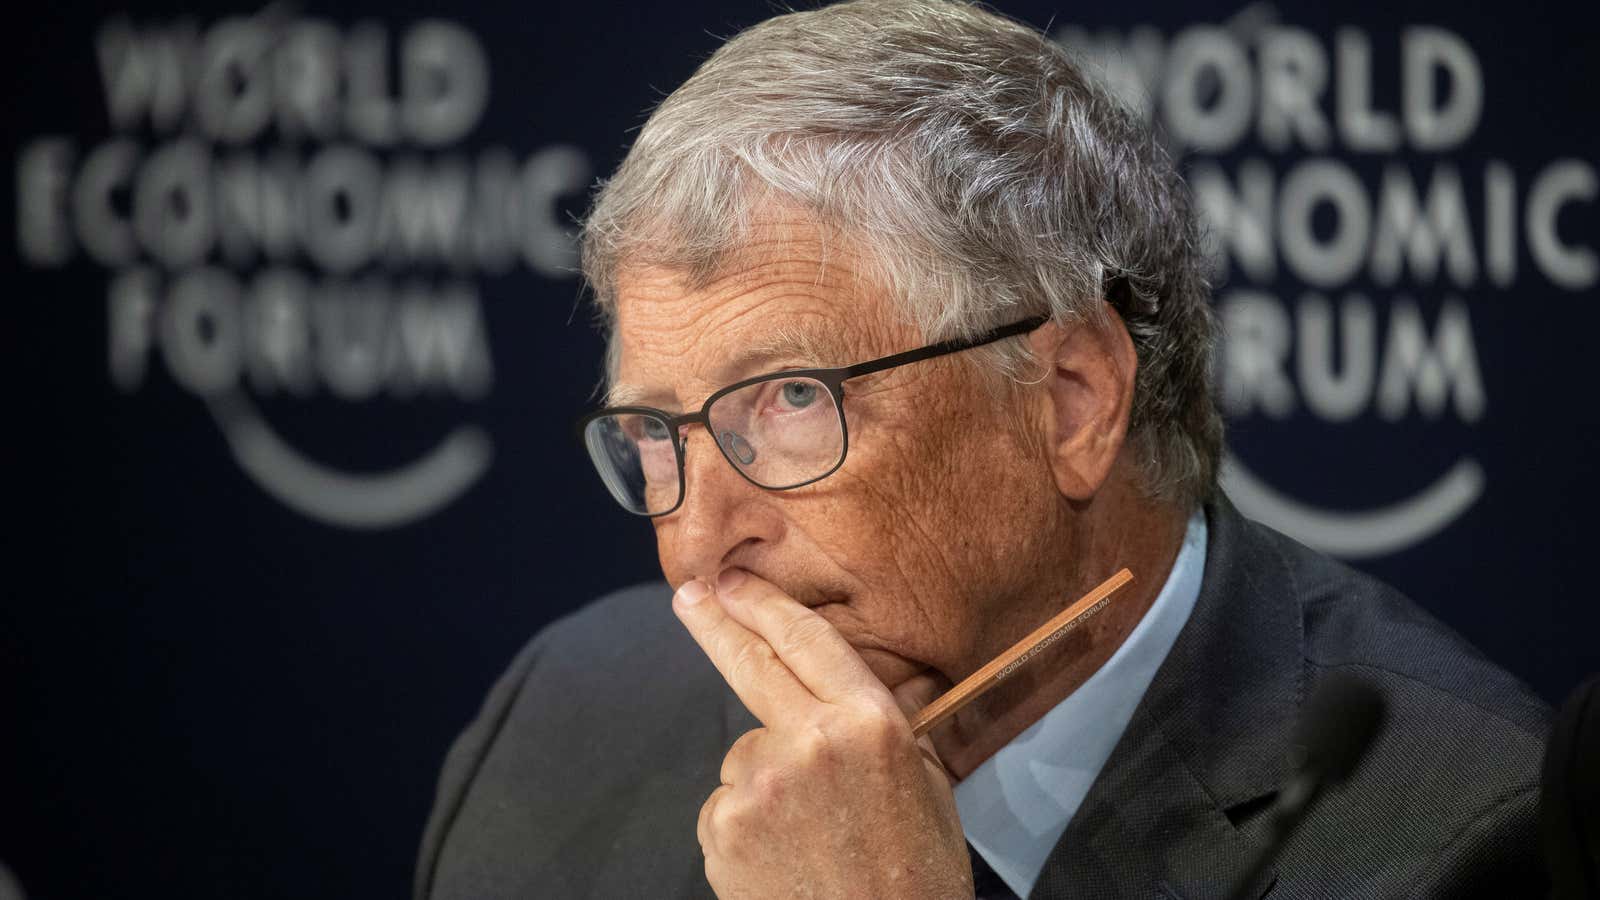 Bill Gates says the pandemic sunk any chance of meeting most of the sustainable development goals.